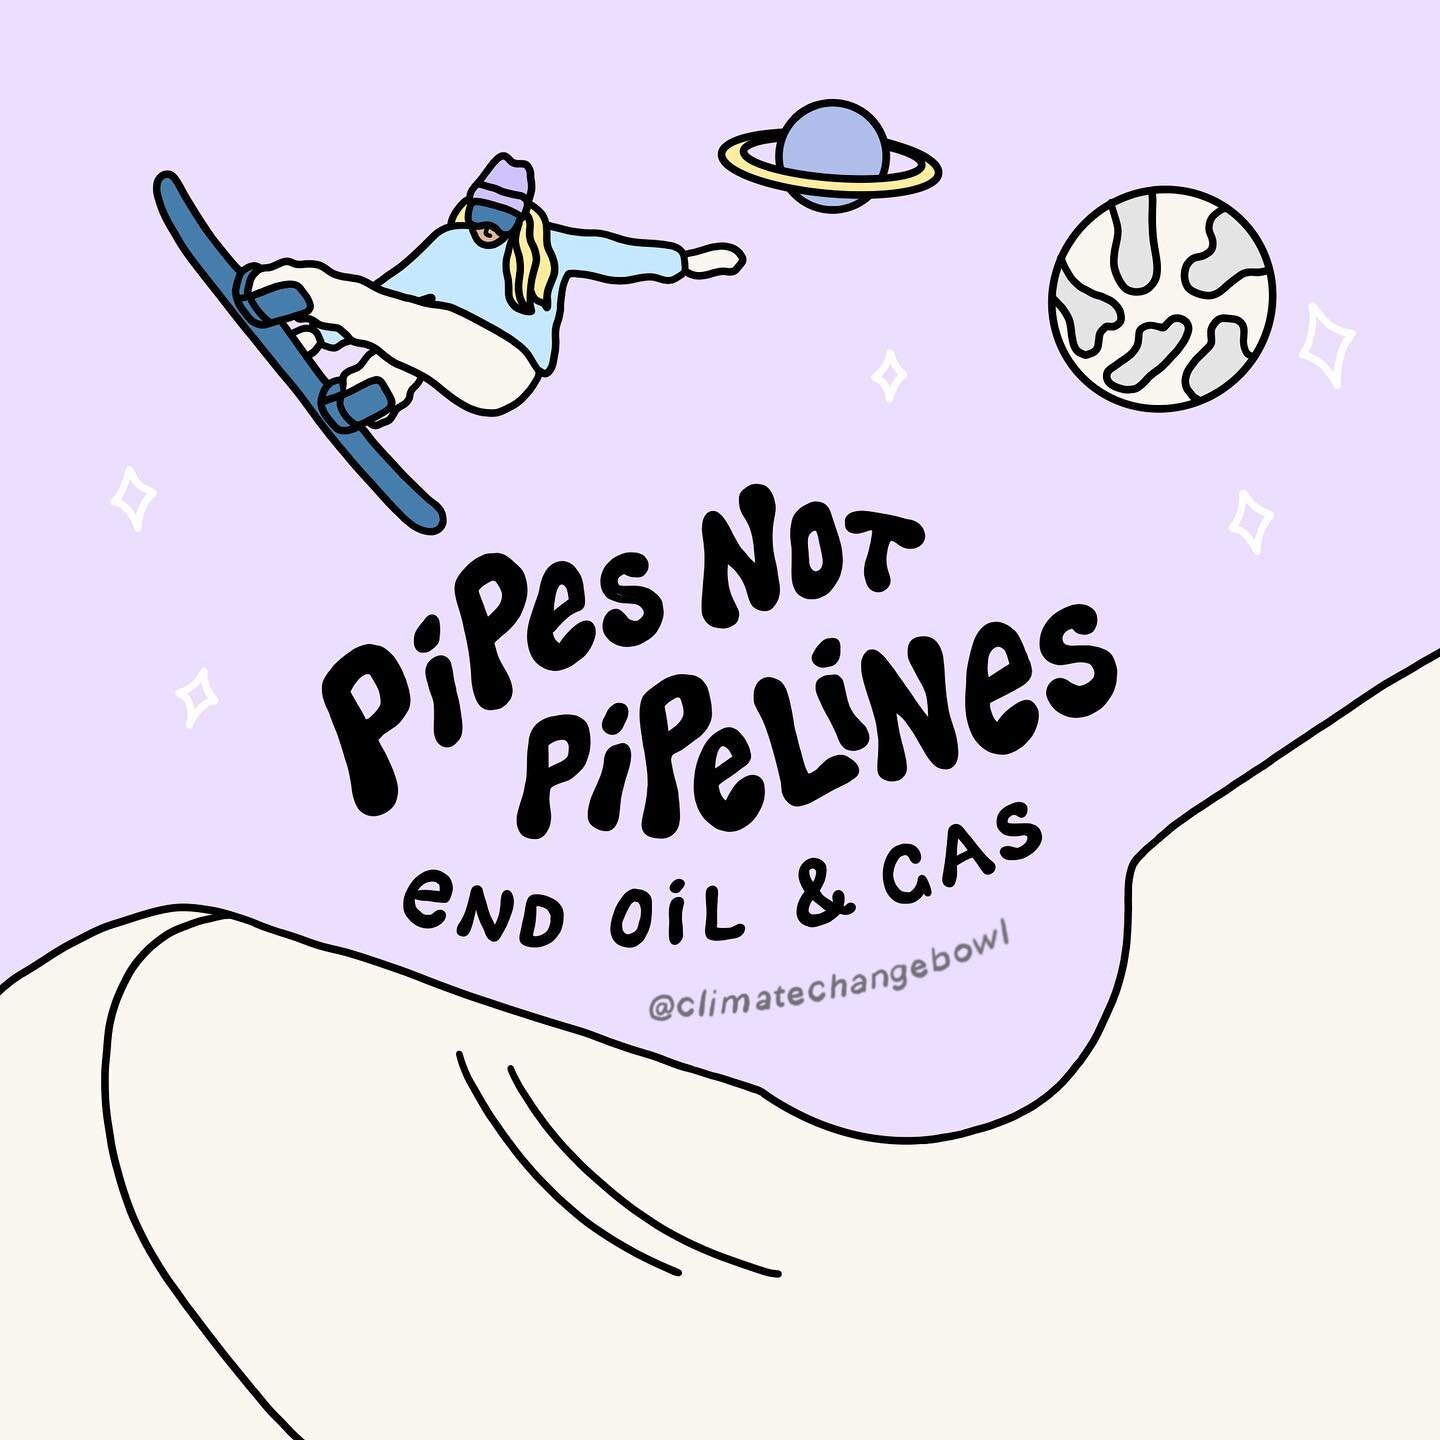 💙🌏 &rdquo;Pipes not pipelines&rdquo; - a new personal fav of mine 💫✨

So we&rsquo;re in this climate crisis and countries have agreed to limit global warming to &ldquo;well below 2&deg;C above pre-industrial levels and pursuing efforts to limit th